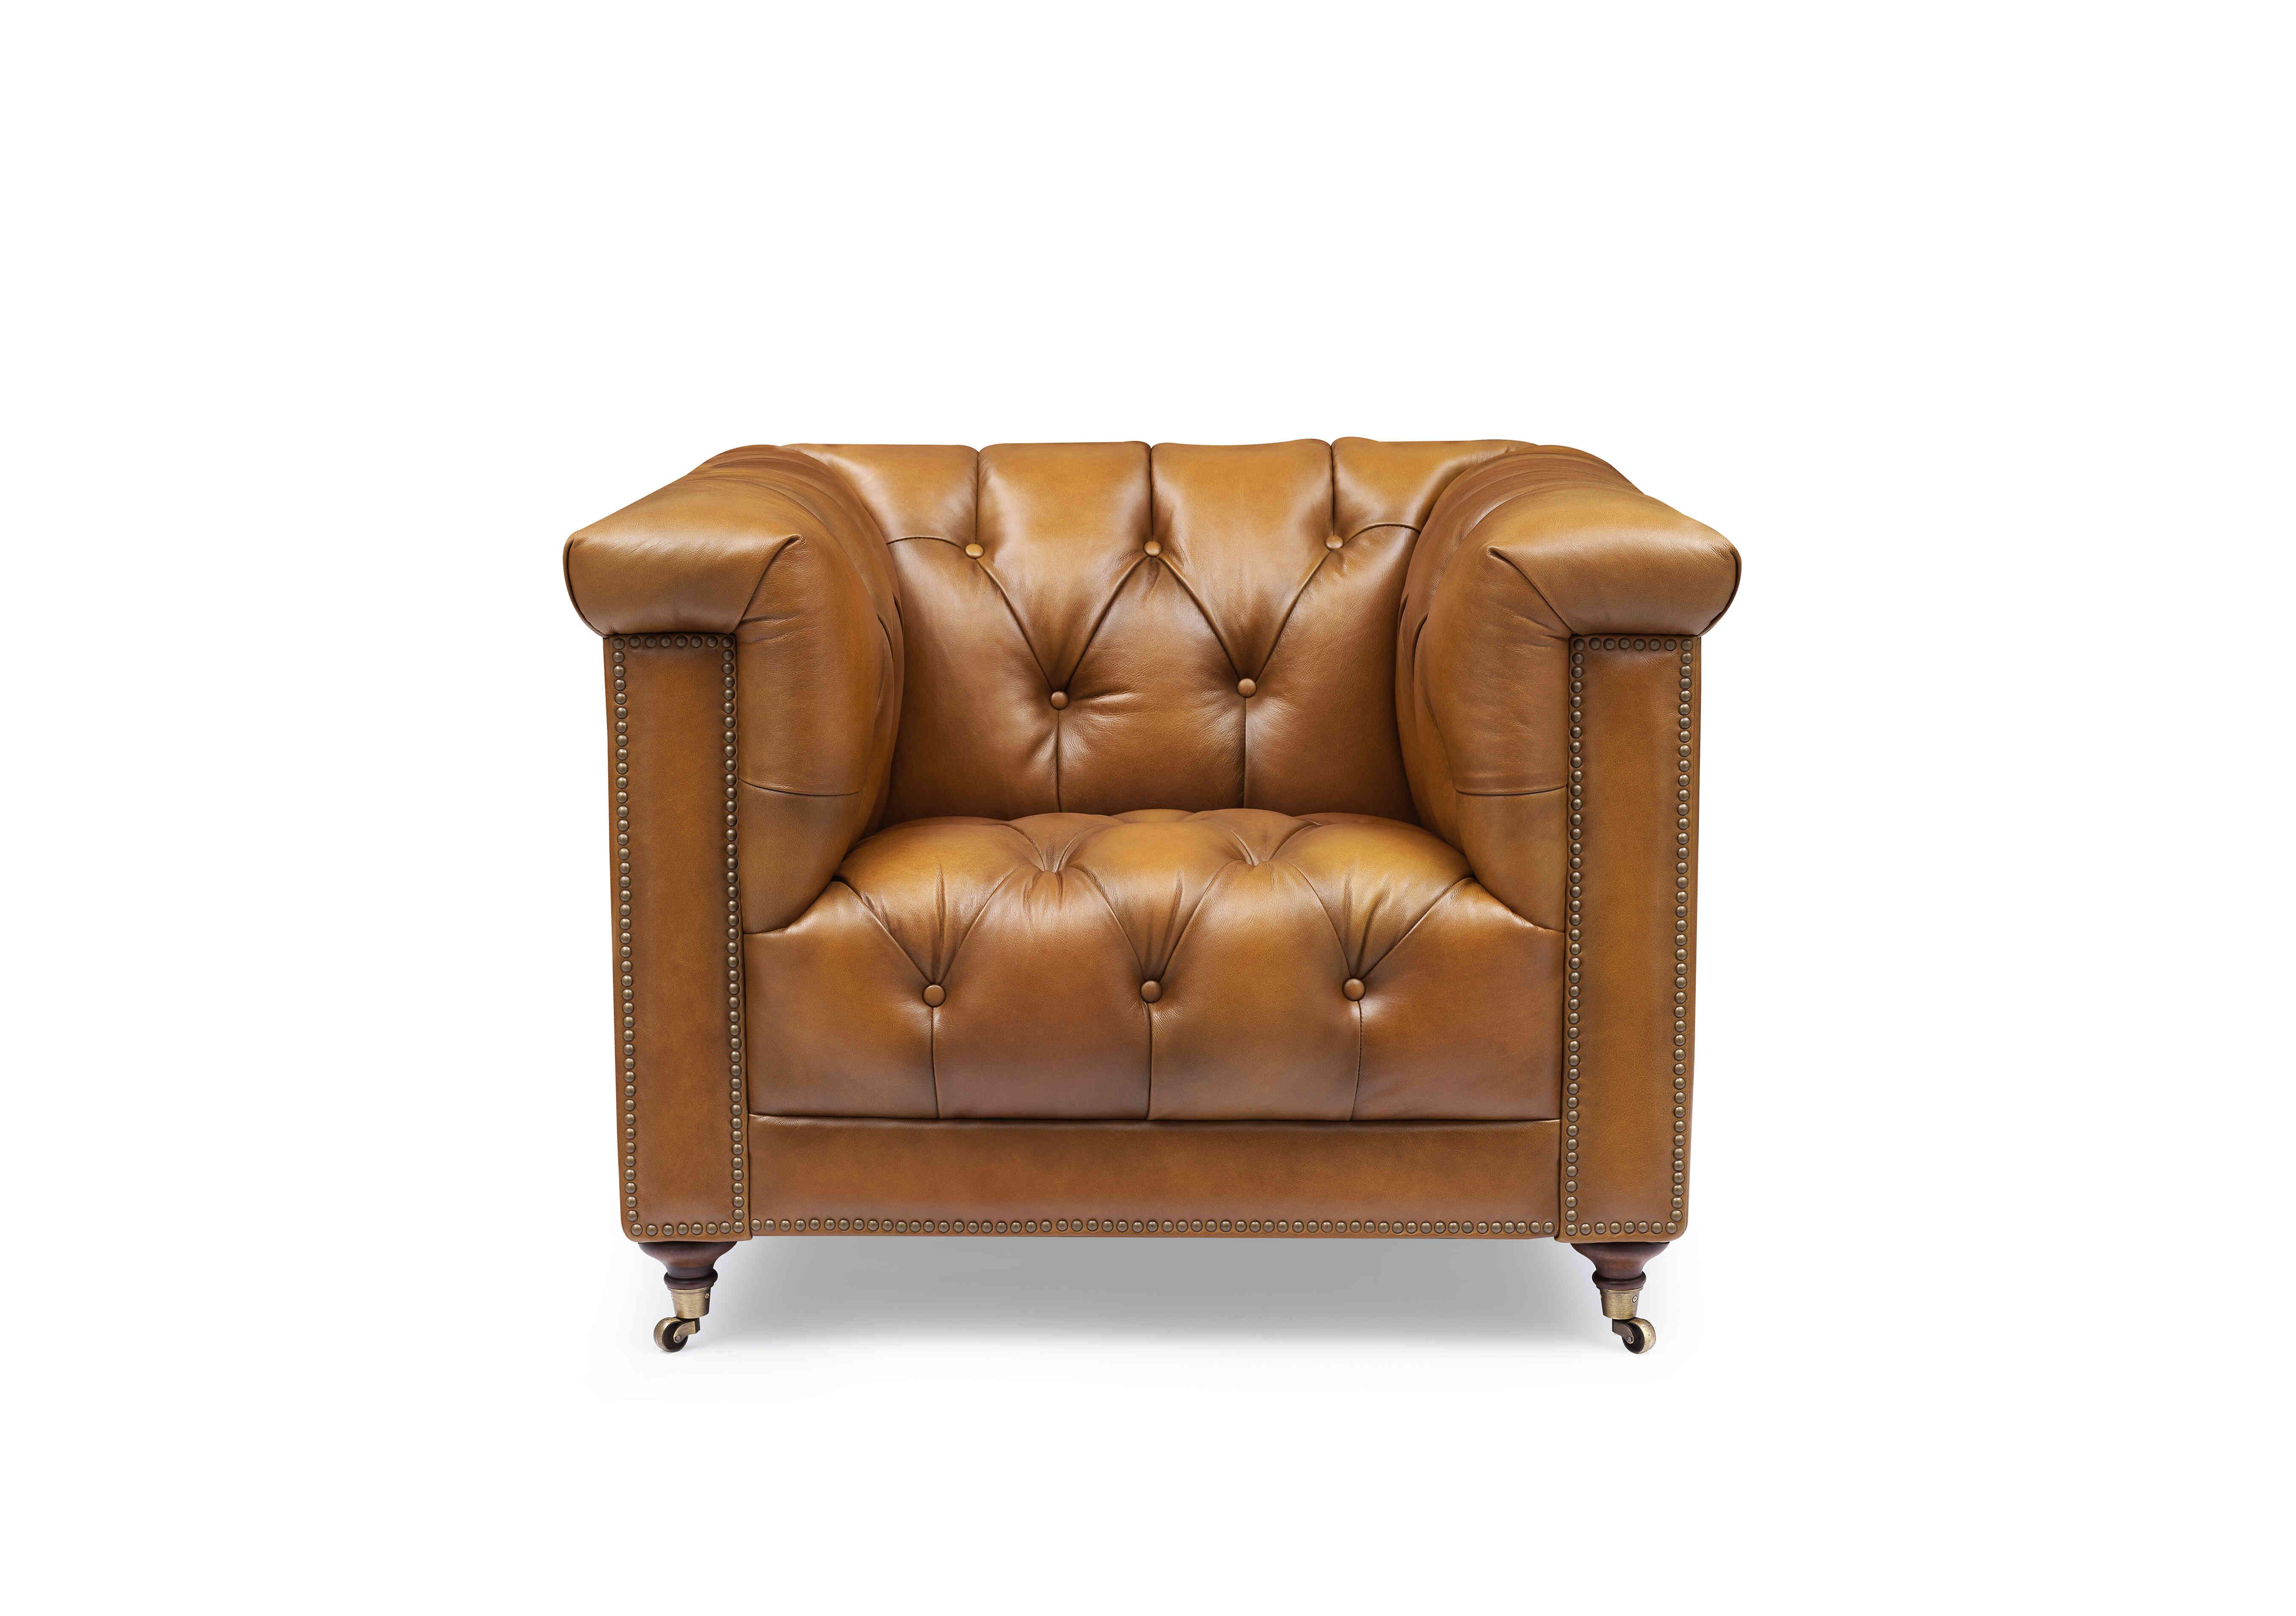 Wallace Leather Chesterfield Chair in X3y1-1957ls Inca on Furniture Village